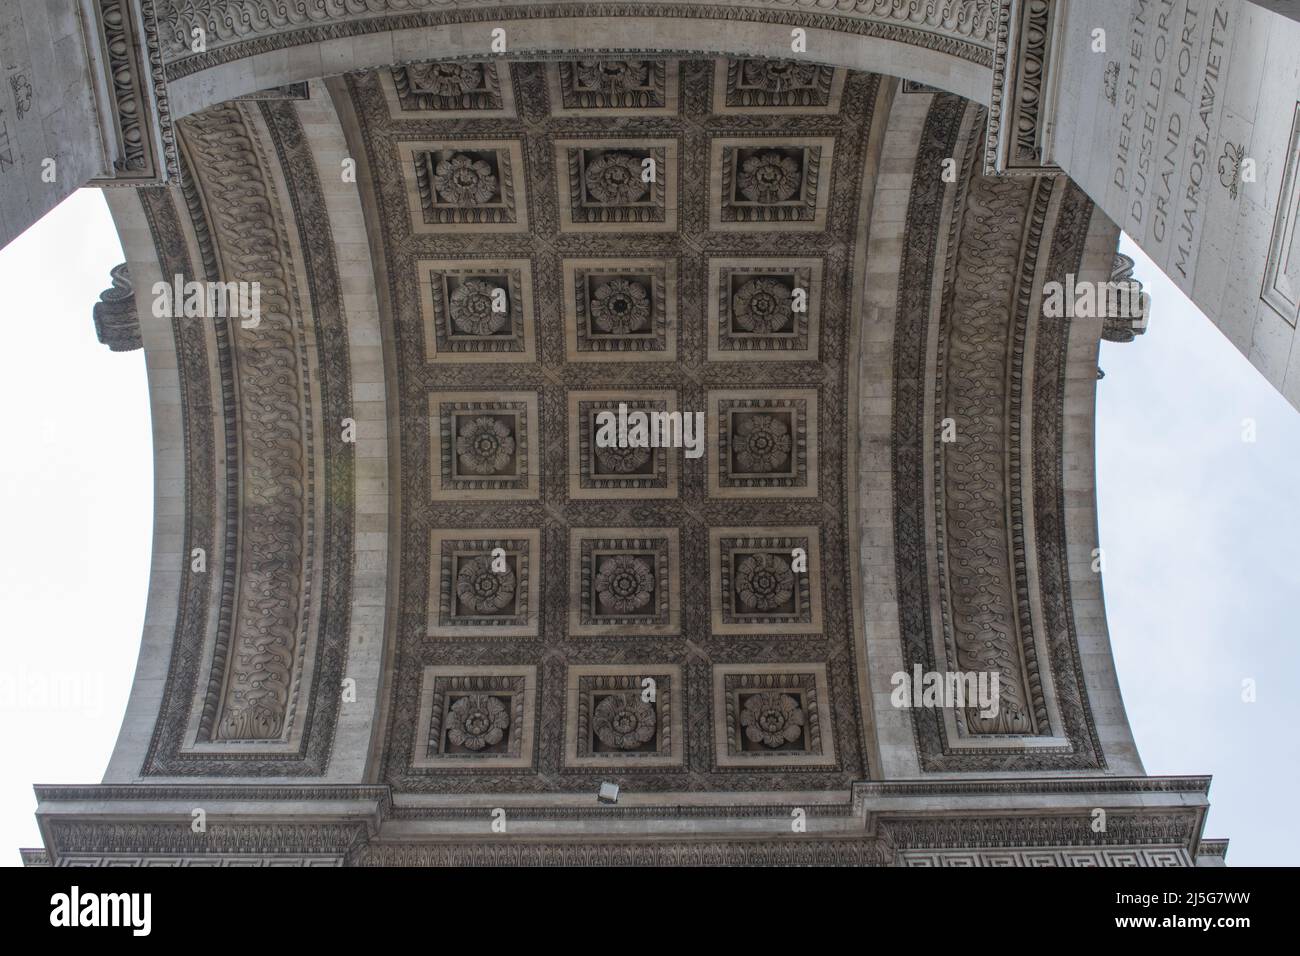 Paris: the ceiling with 21 sculpted roses of the Triumphal Arch of the Star (Arc de Triomphe de l'Etoile), one of the most famous monuments of Paris Stock Photo